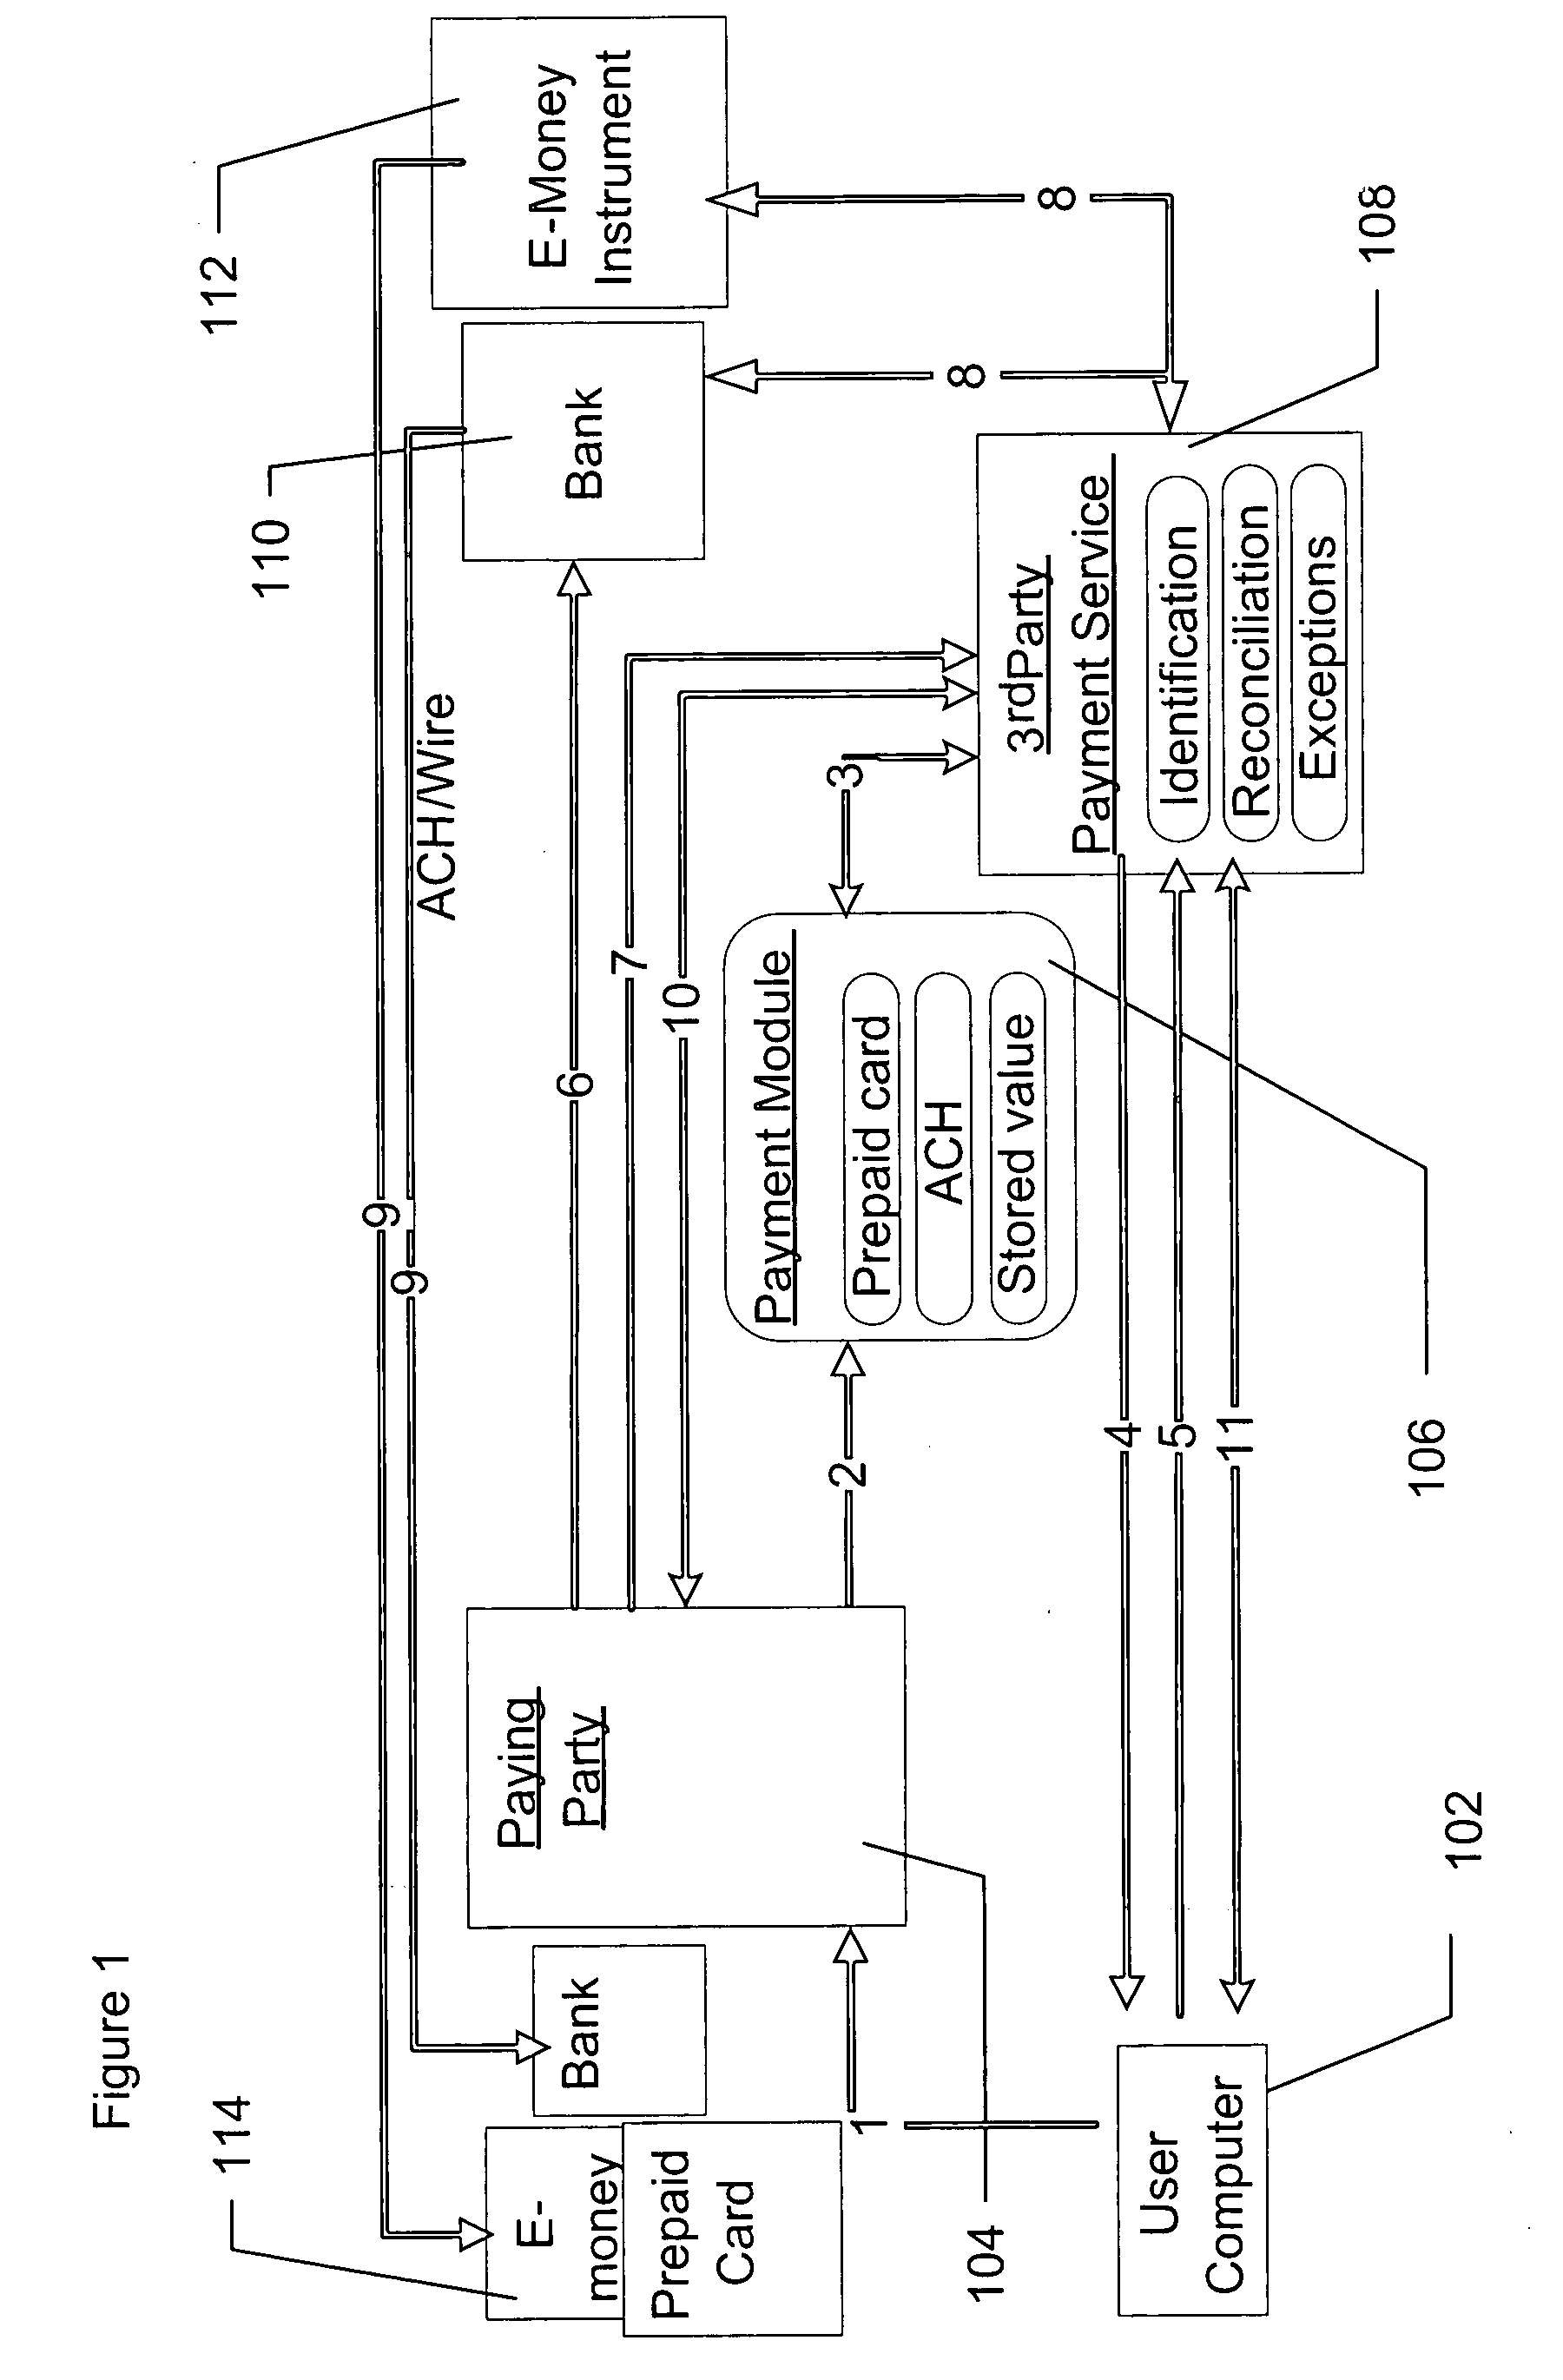 System and method for payment transfer